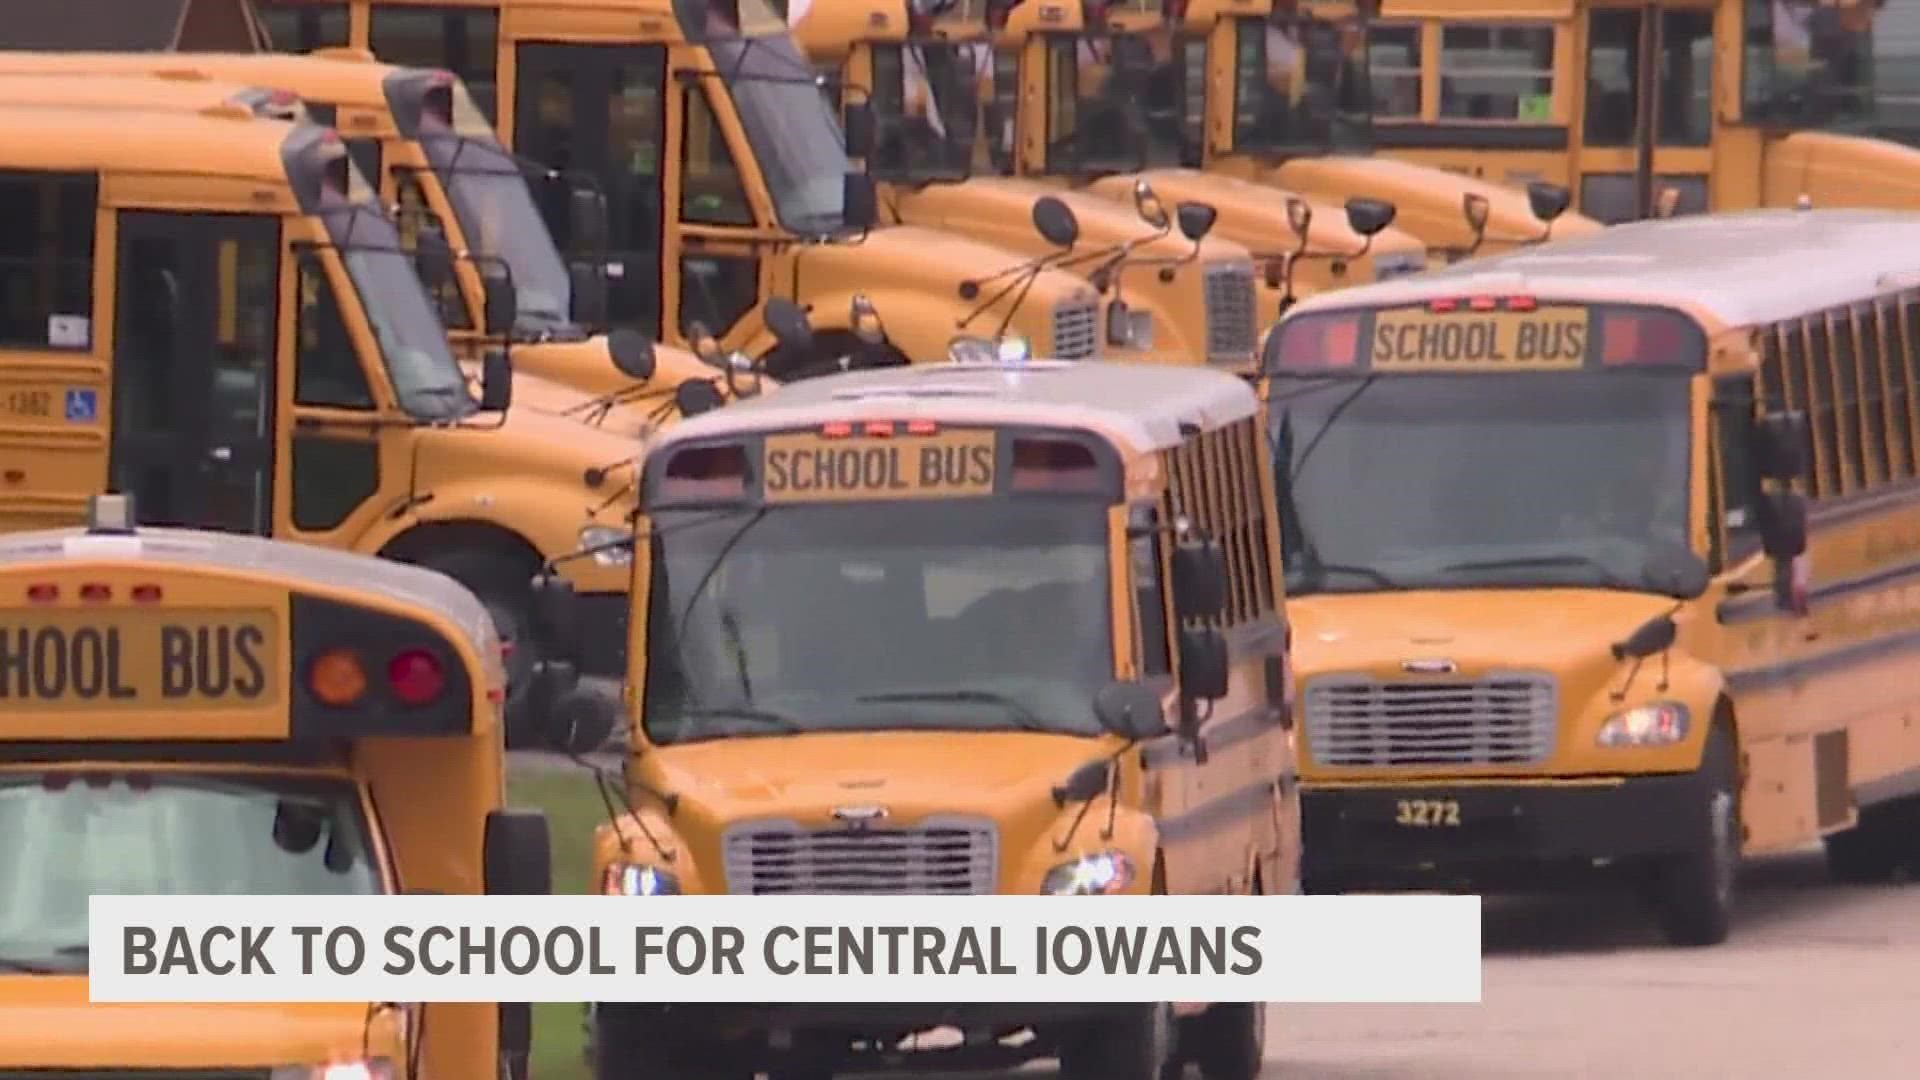 Coy Marquardt, the associate executive director of the Iowa State Education Association, told Local 5 it's a challenging time for public education for Iowa.